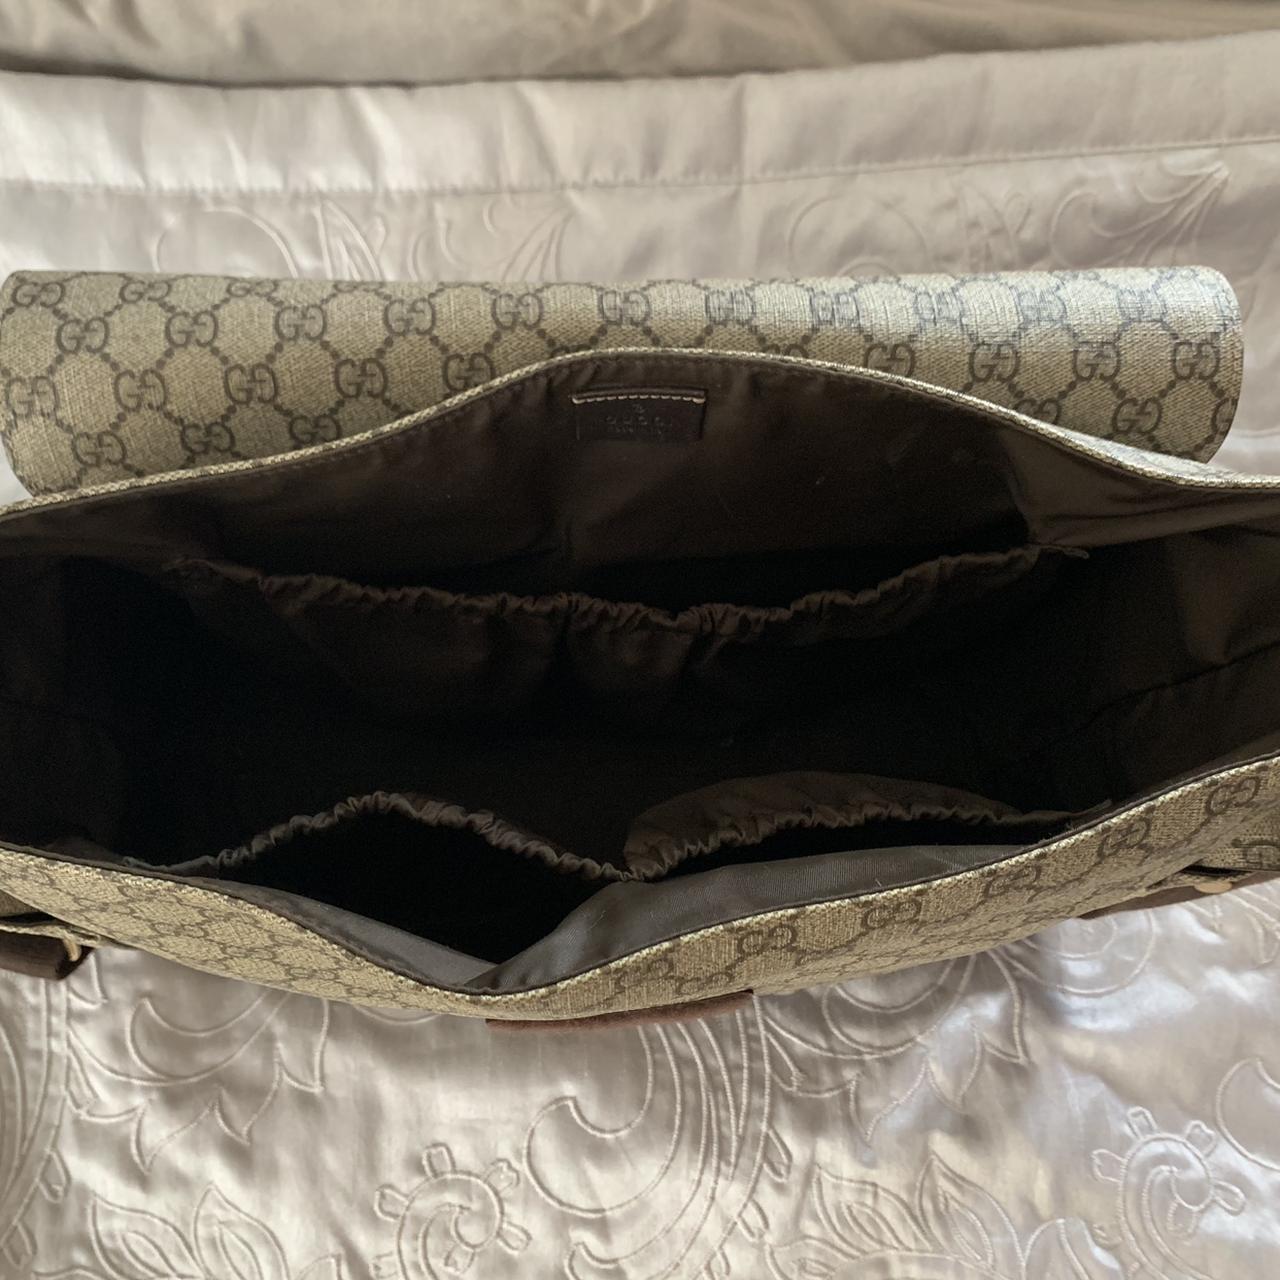 Gucci changing bag bought for £885 From Harvey - Depop